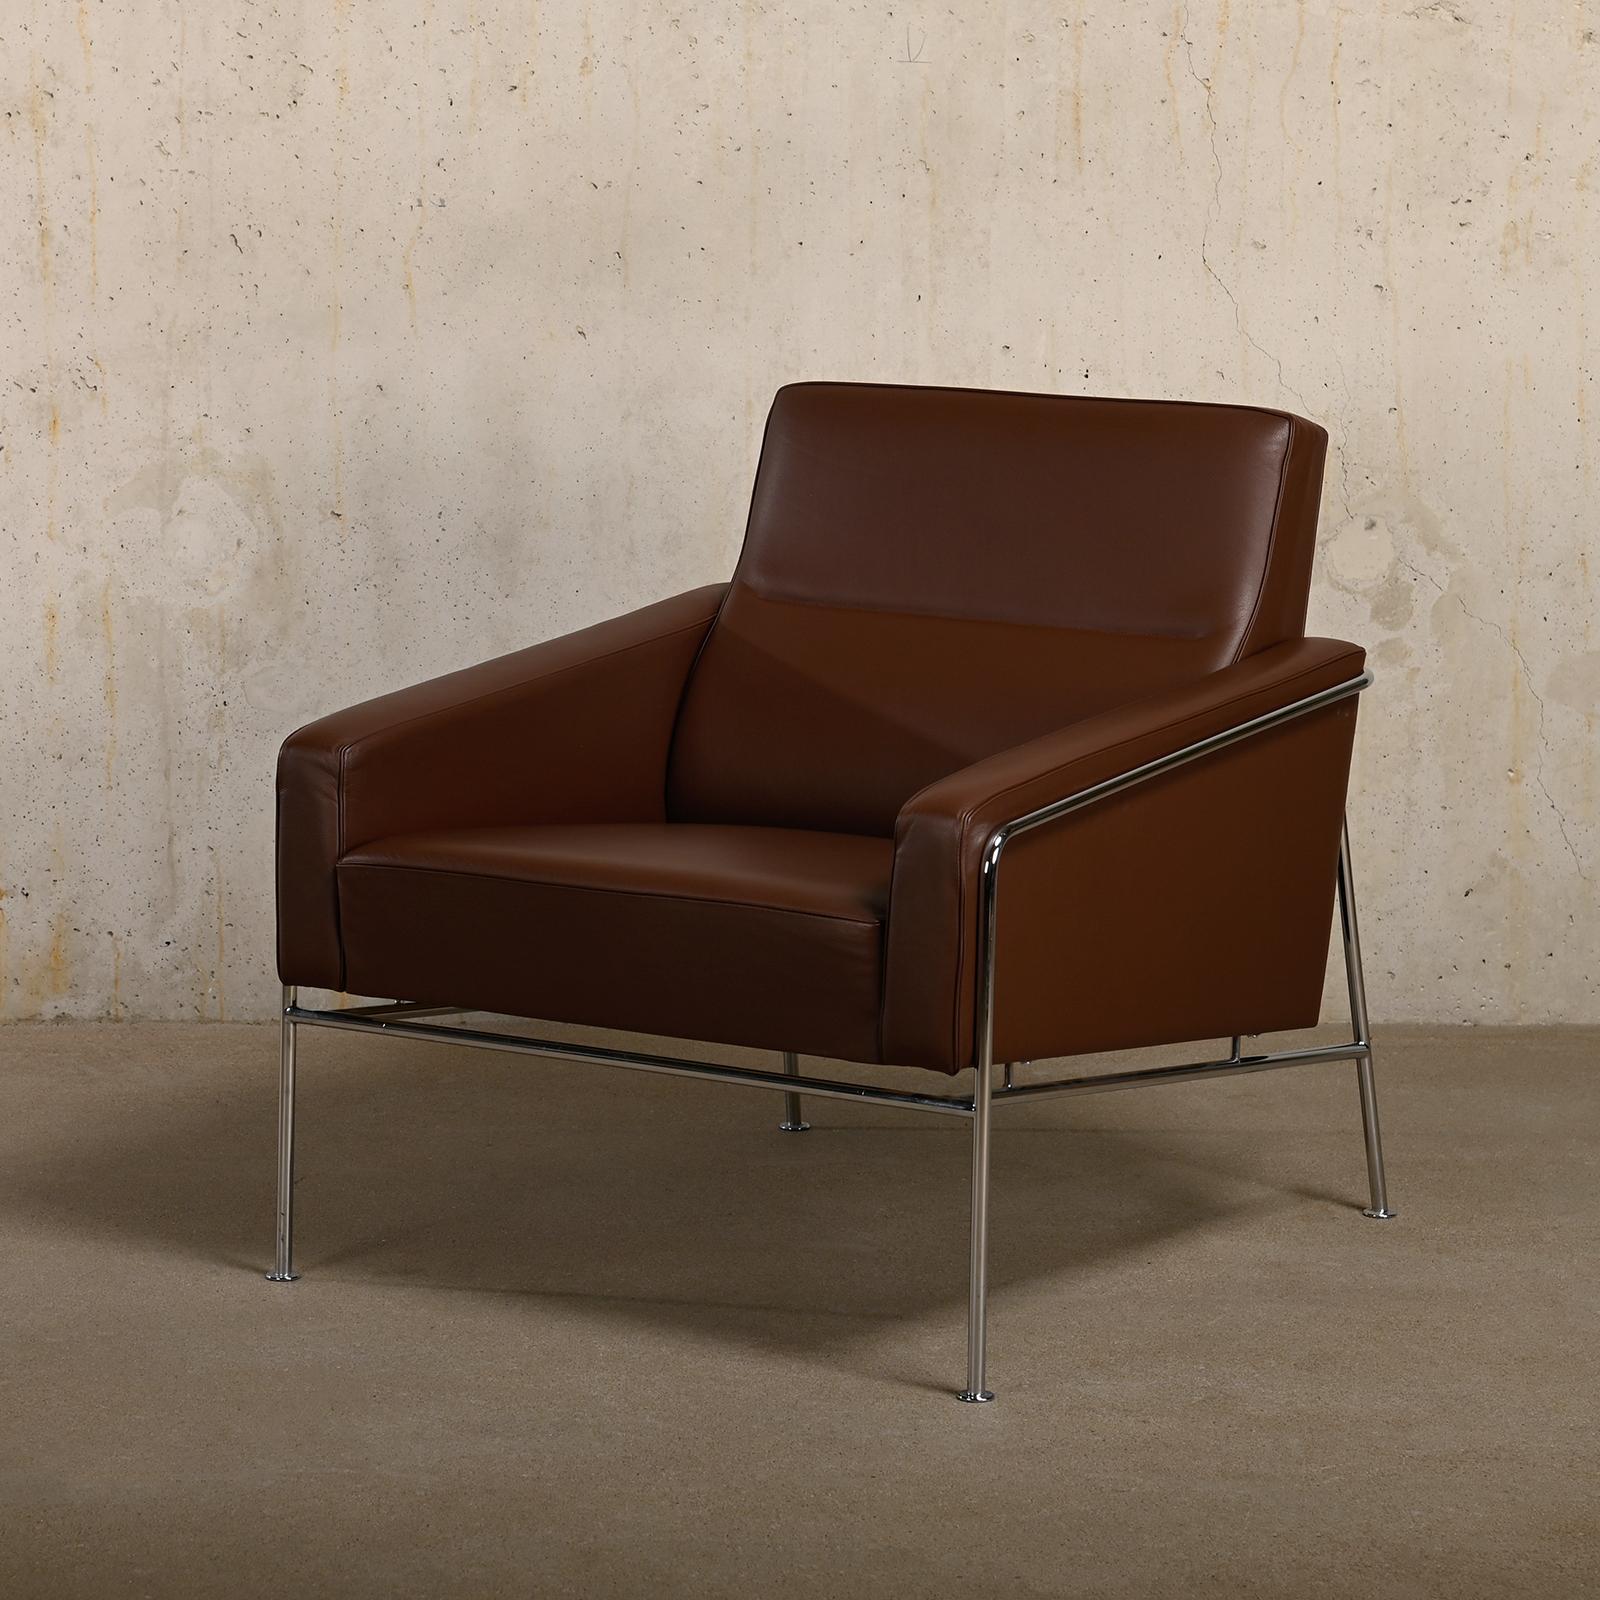 Mid-20th Century Arne Jacobsen Lounge Chair 3300 Series in Chestnut leather for Fritz Hansen For Sale